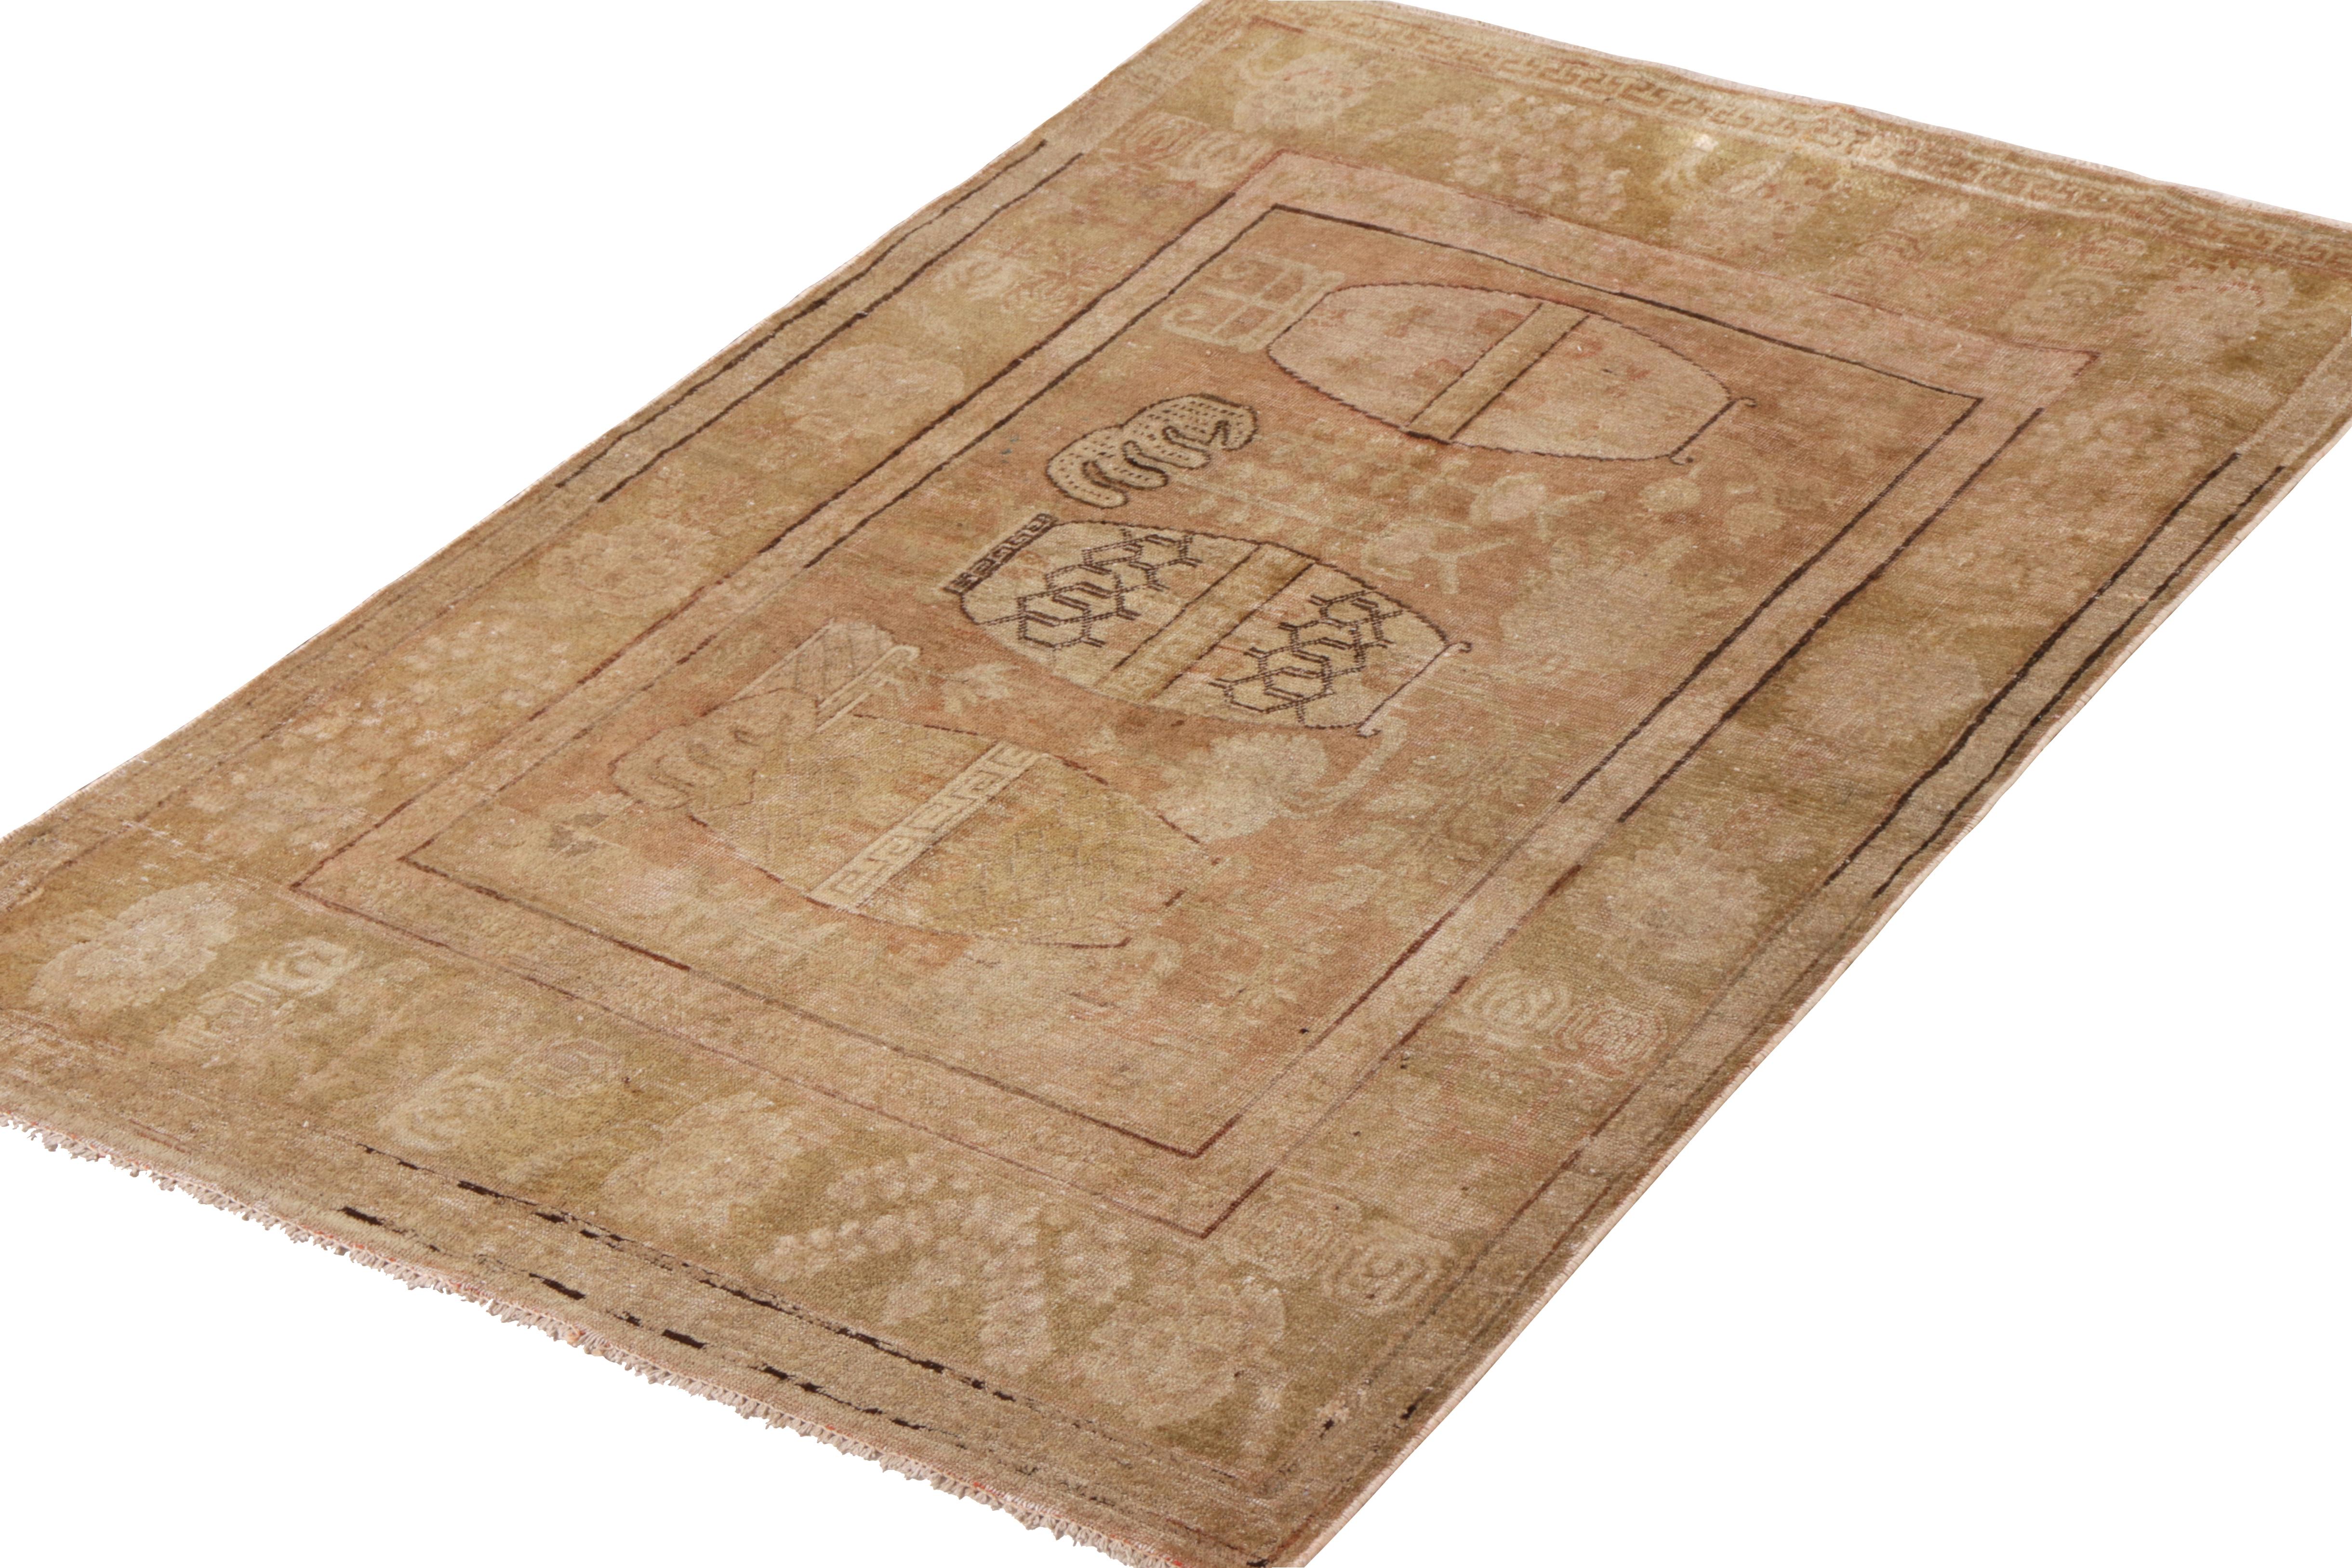 An antique 4 x 7 Khotan rug in a rare pictorial design—hand-knotted in wool circa 1920-1930 from East Turkestan. Enjoying further distinction in a subtle pink accent in the beige-brown colorway, uniquely complementing the classic look. 

Further